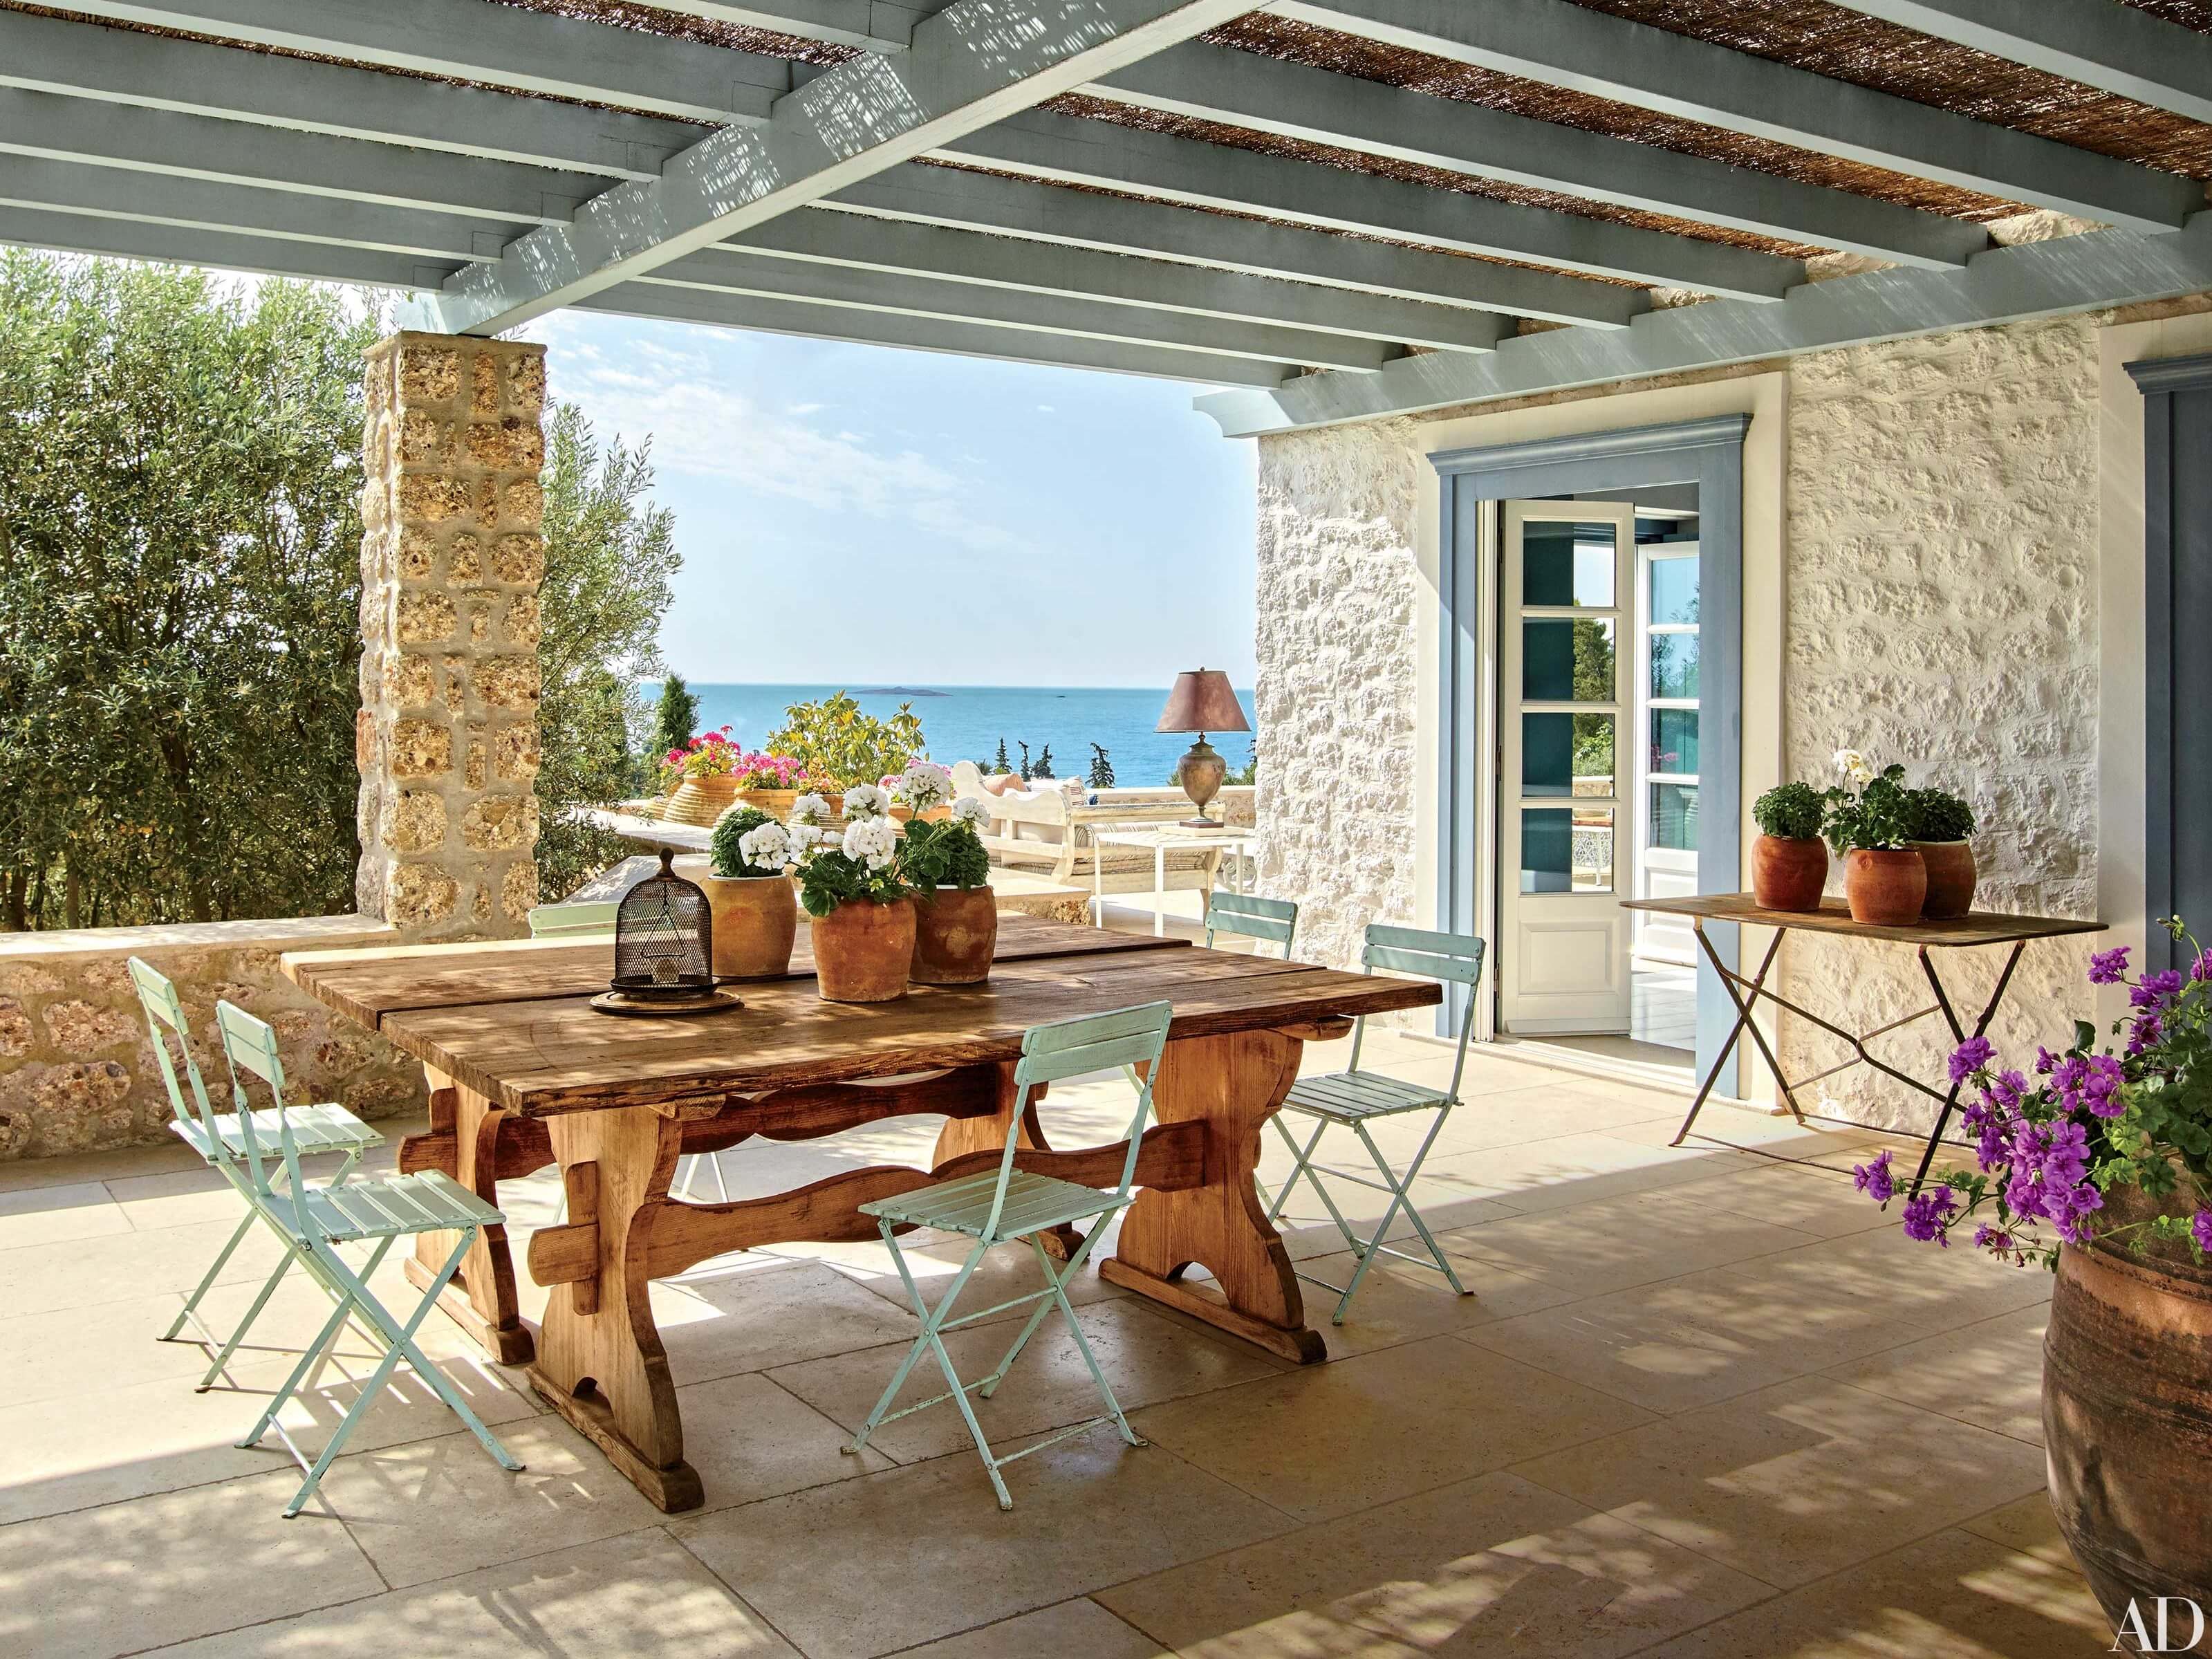 A patio with a table and chairs overlooking the ocean.